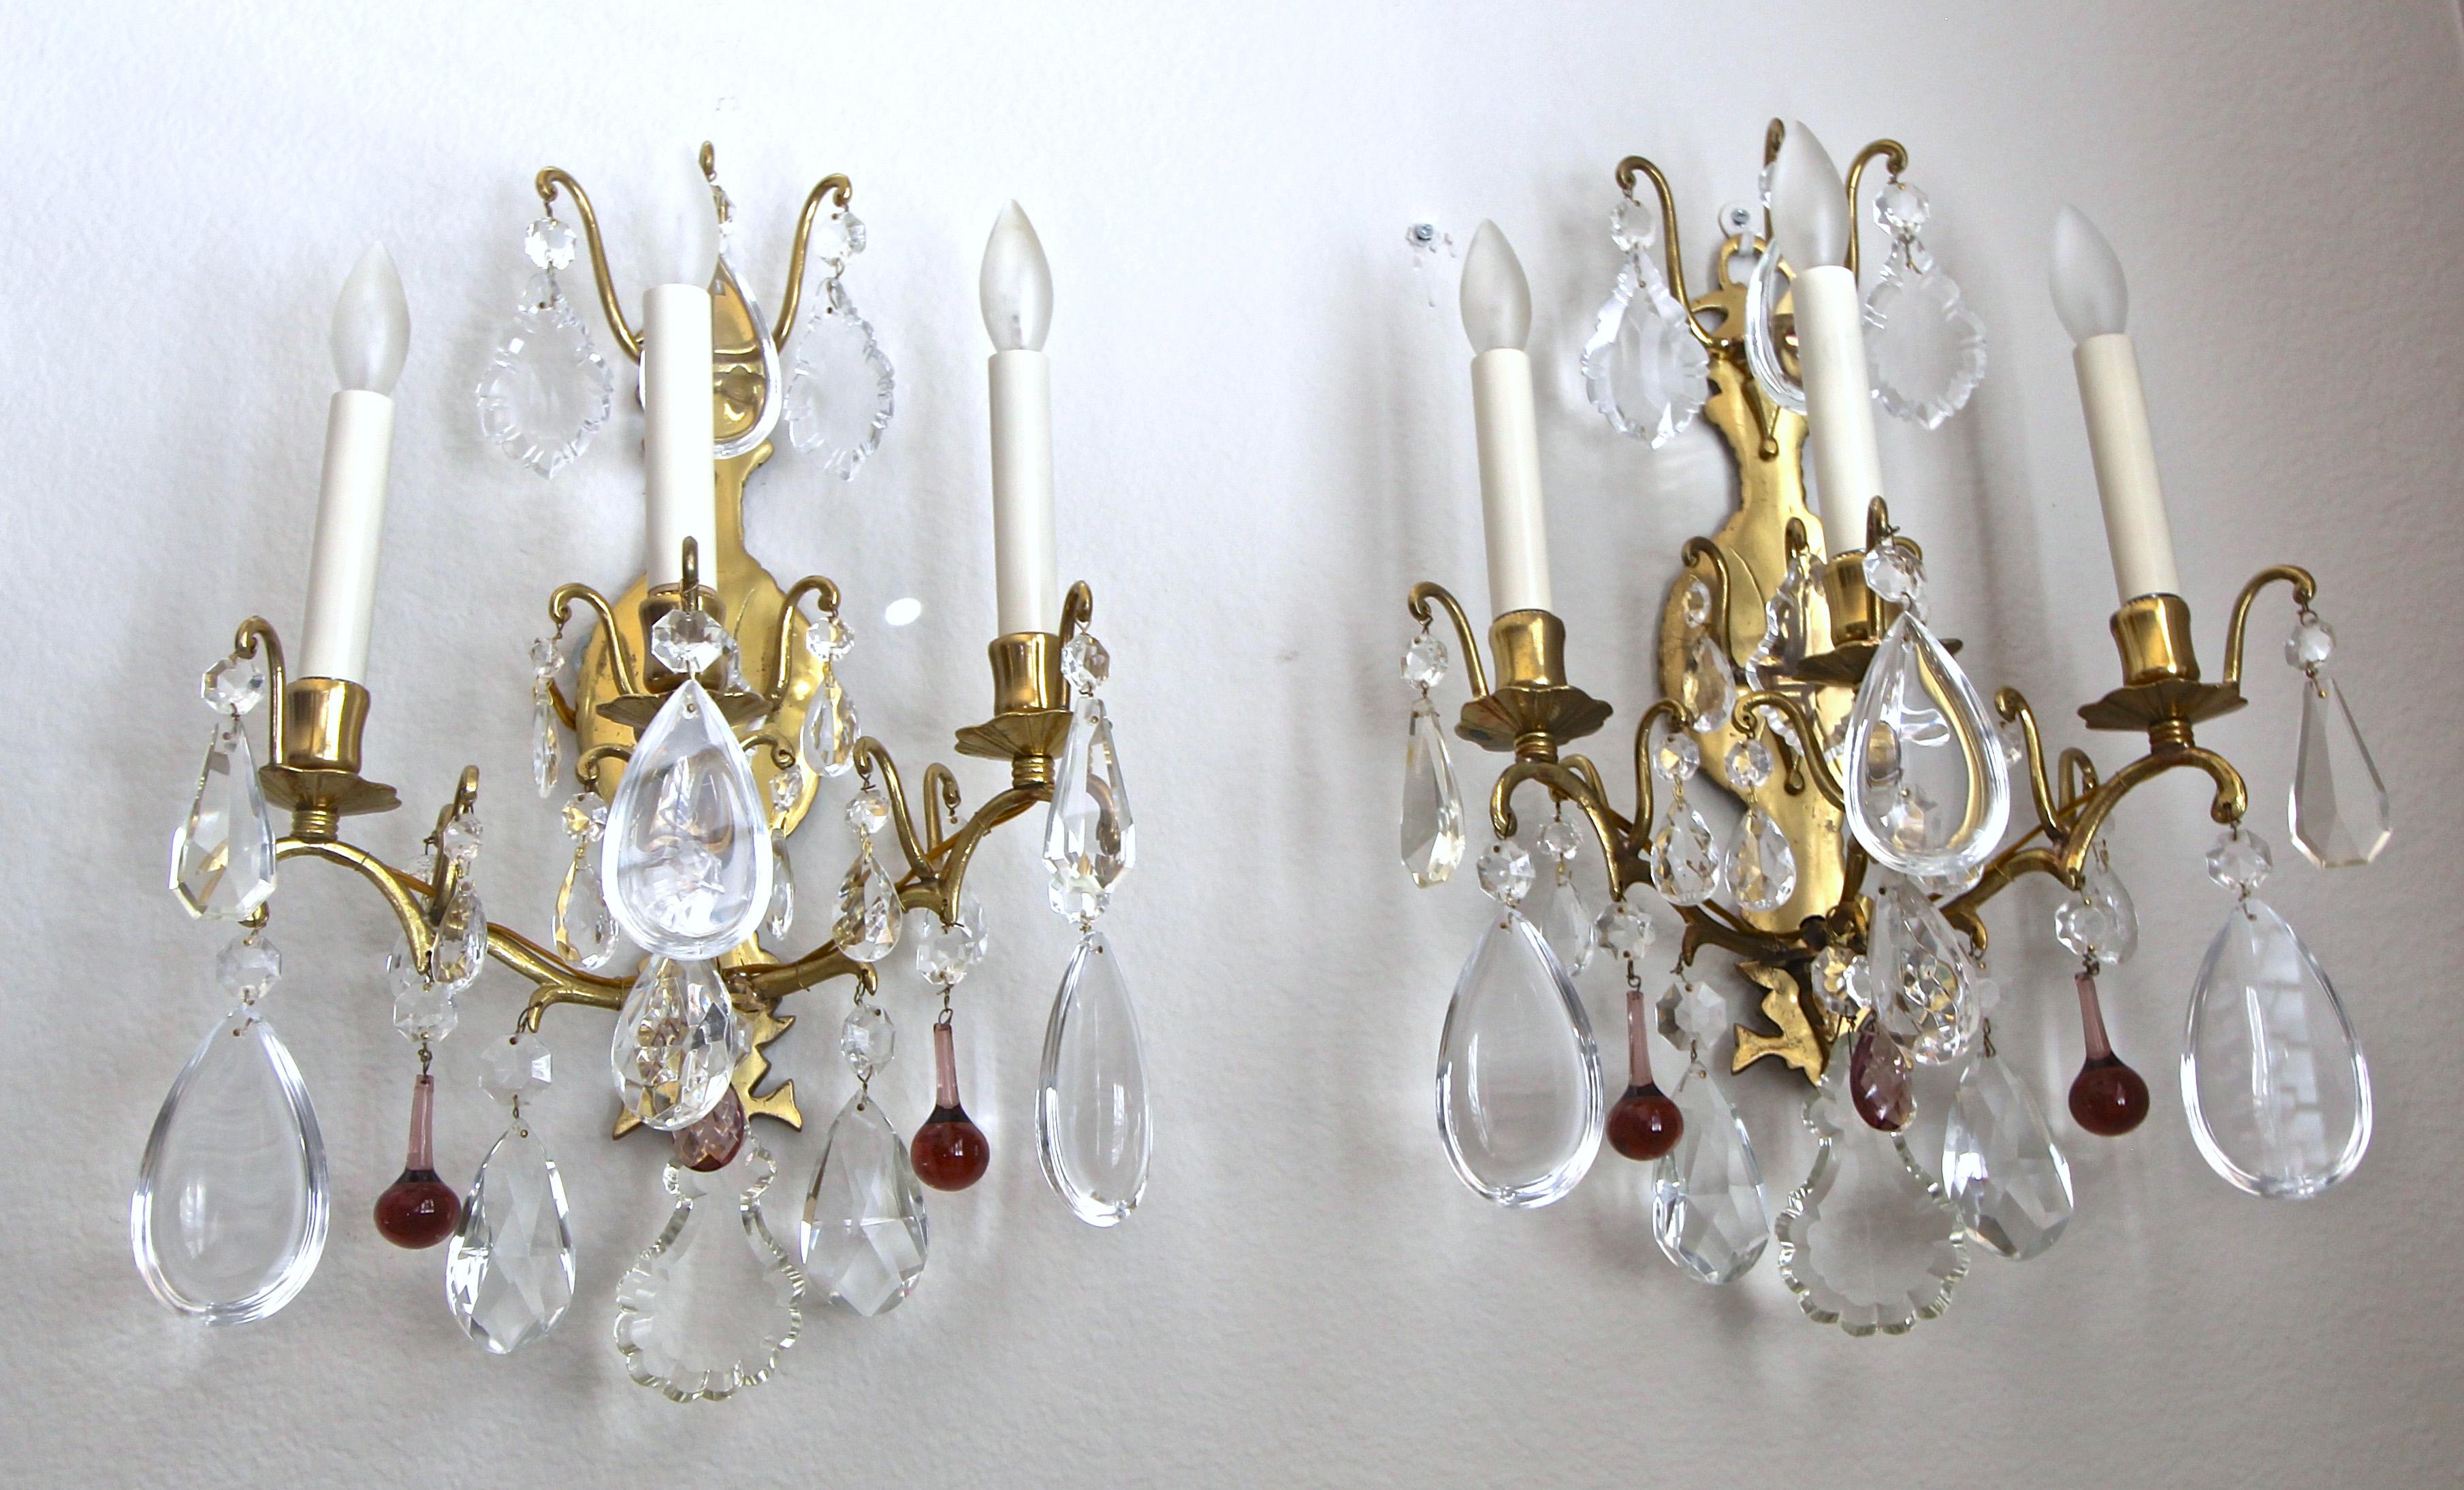 Pair of three-light French Louis XV style wall sconces with crystal pendalogues and amethyst droplets on a brass frame.